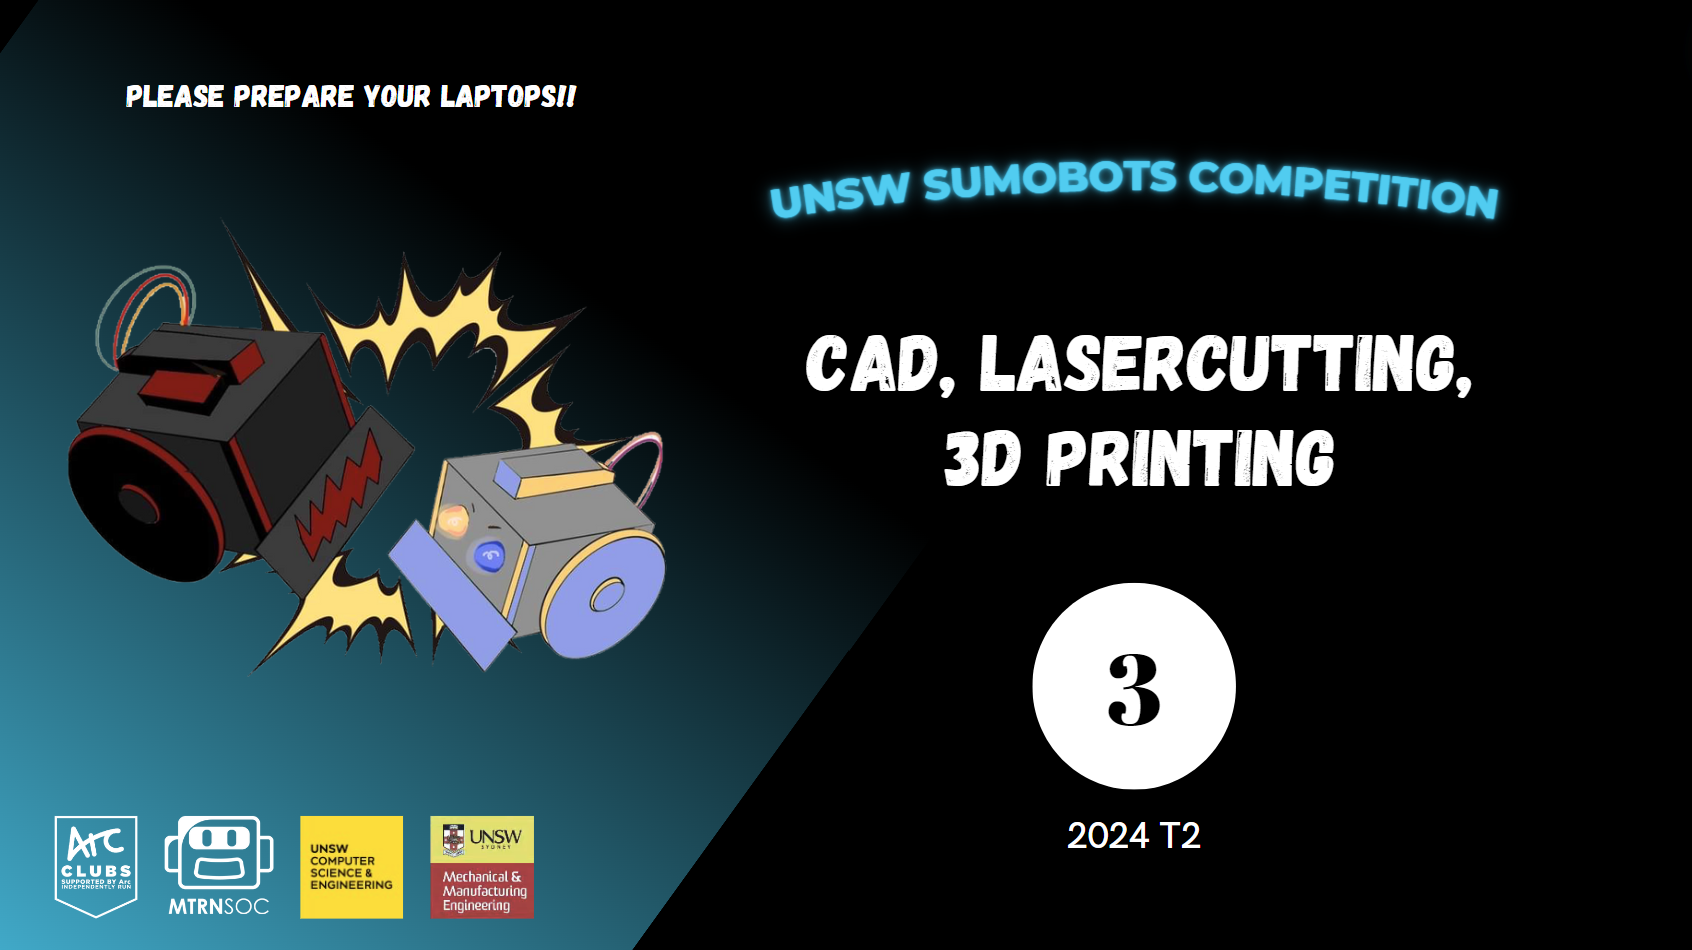 CAD, Lasercutting and 3D Printing